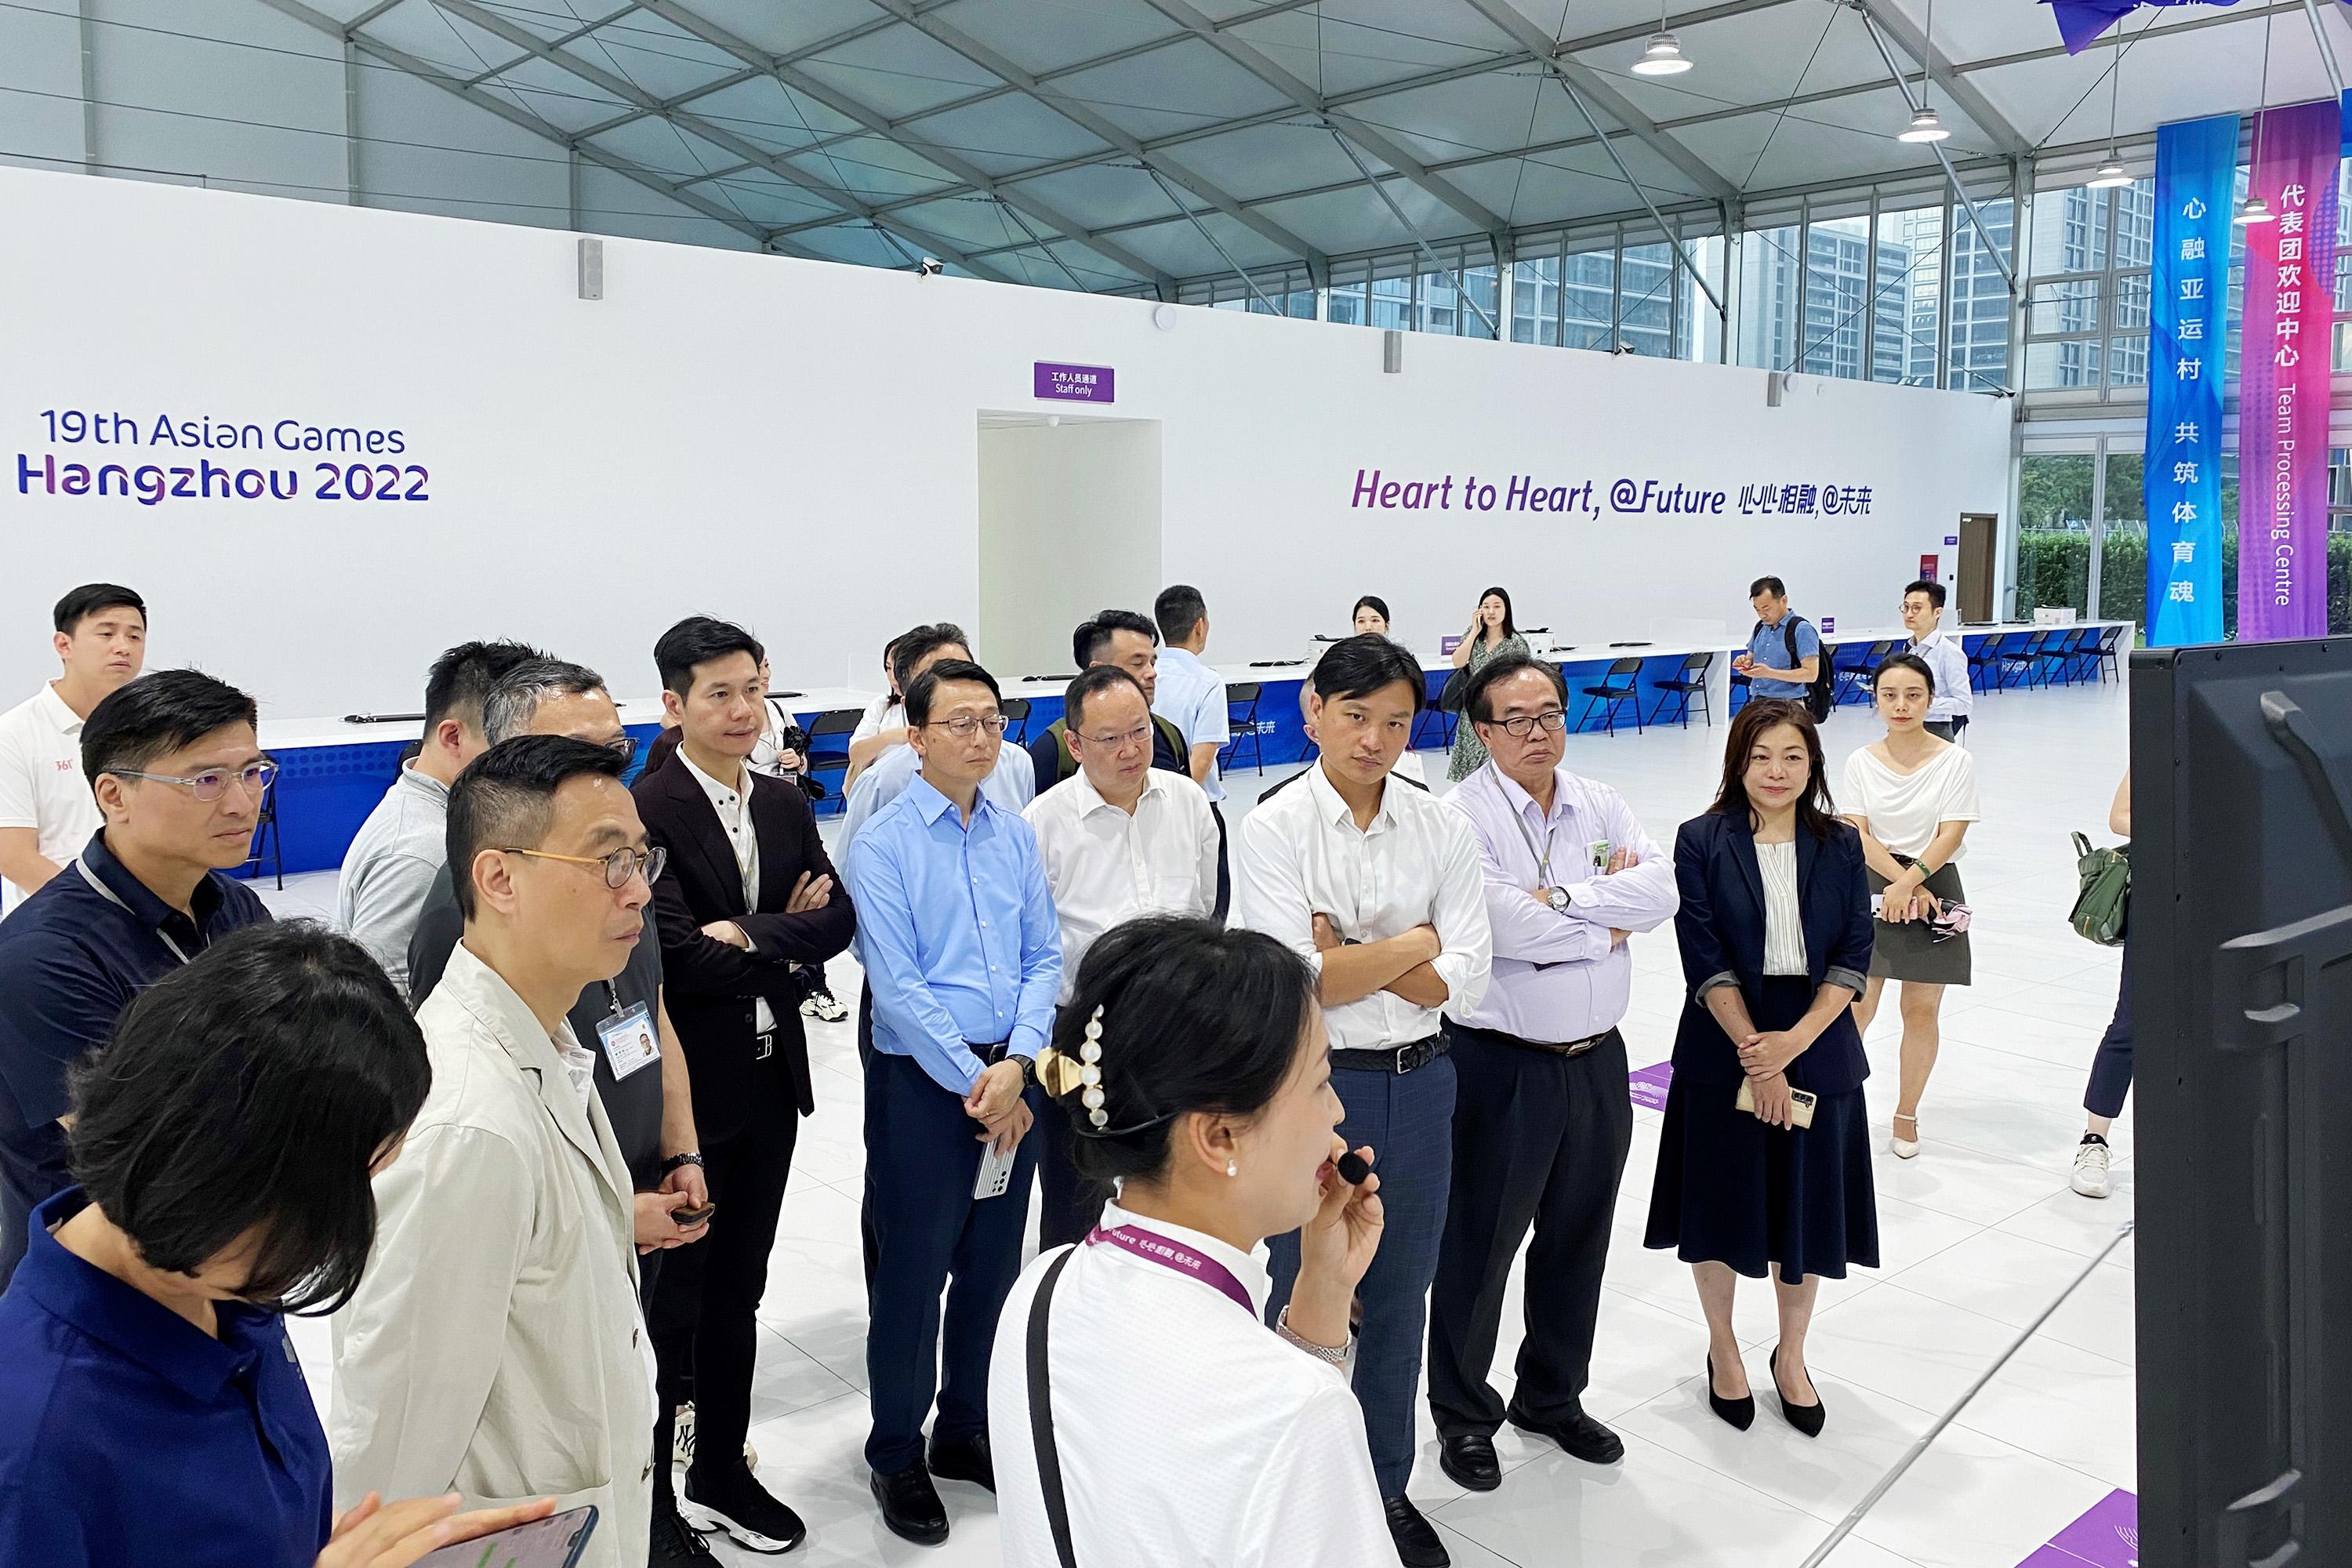 LegCo Panel on Home Affairs, Culture and Sports continues duty visit to Hangzhou today (August 1). The delegation visits the Asian Games Village.